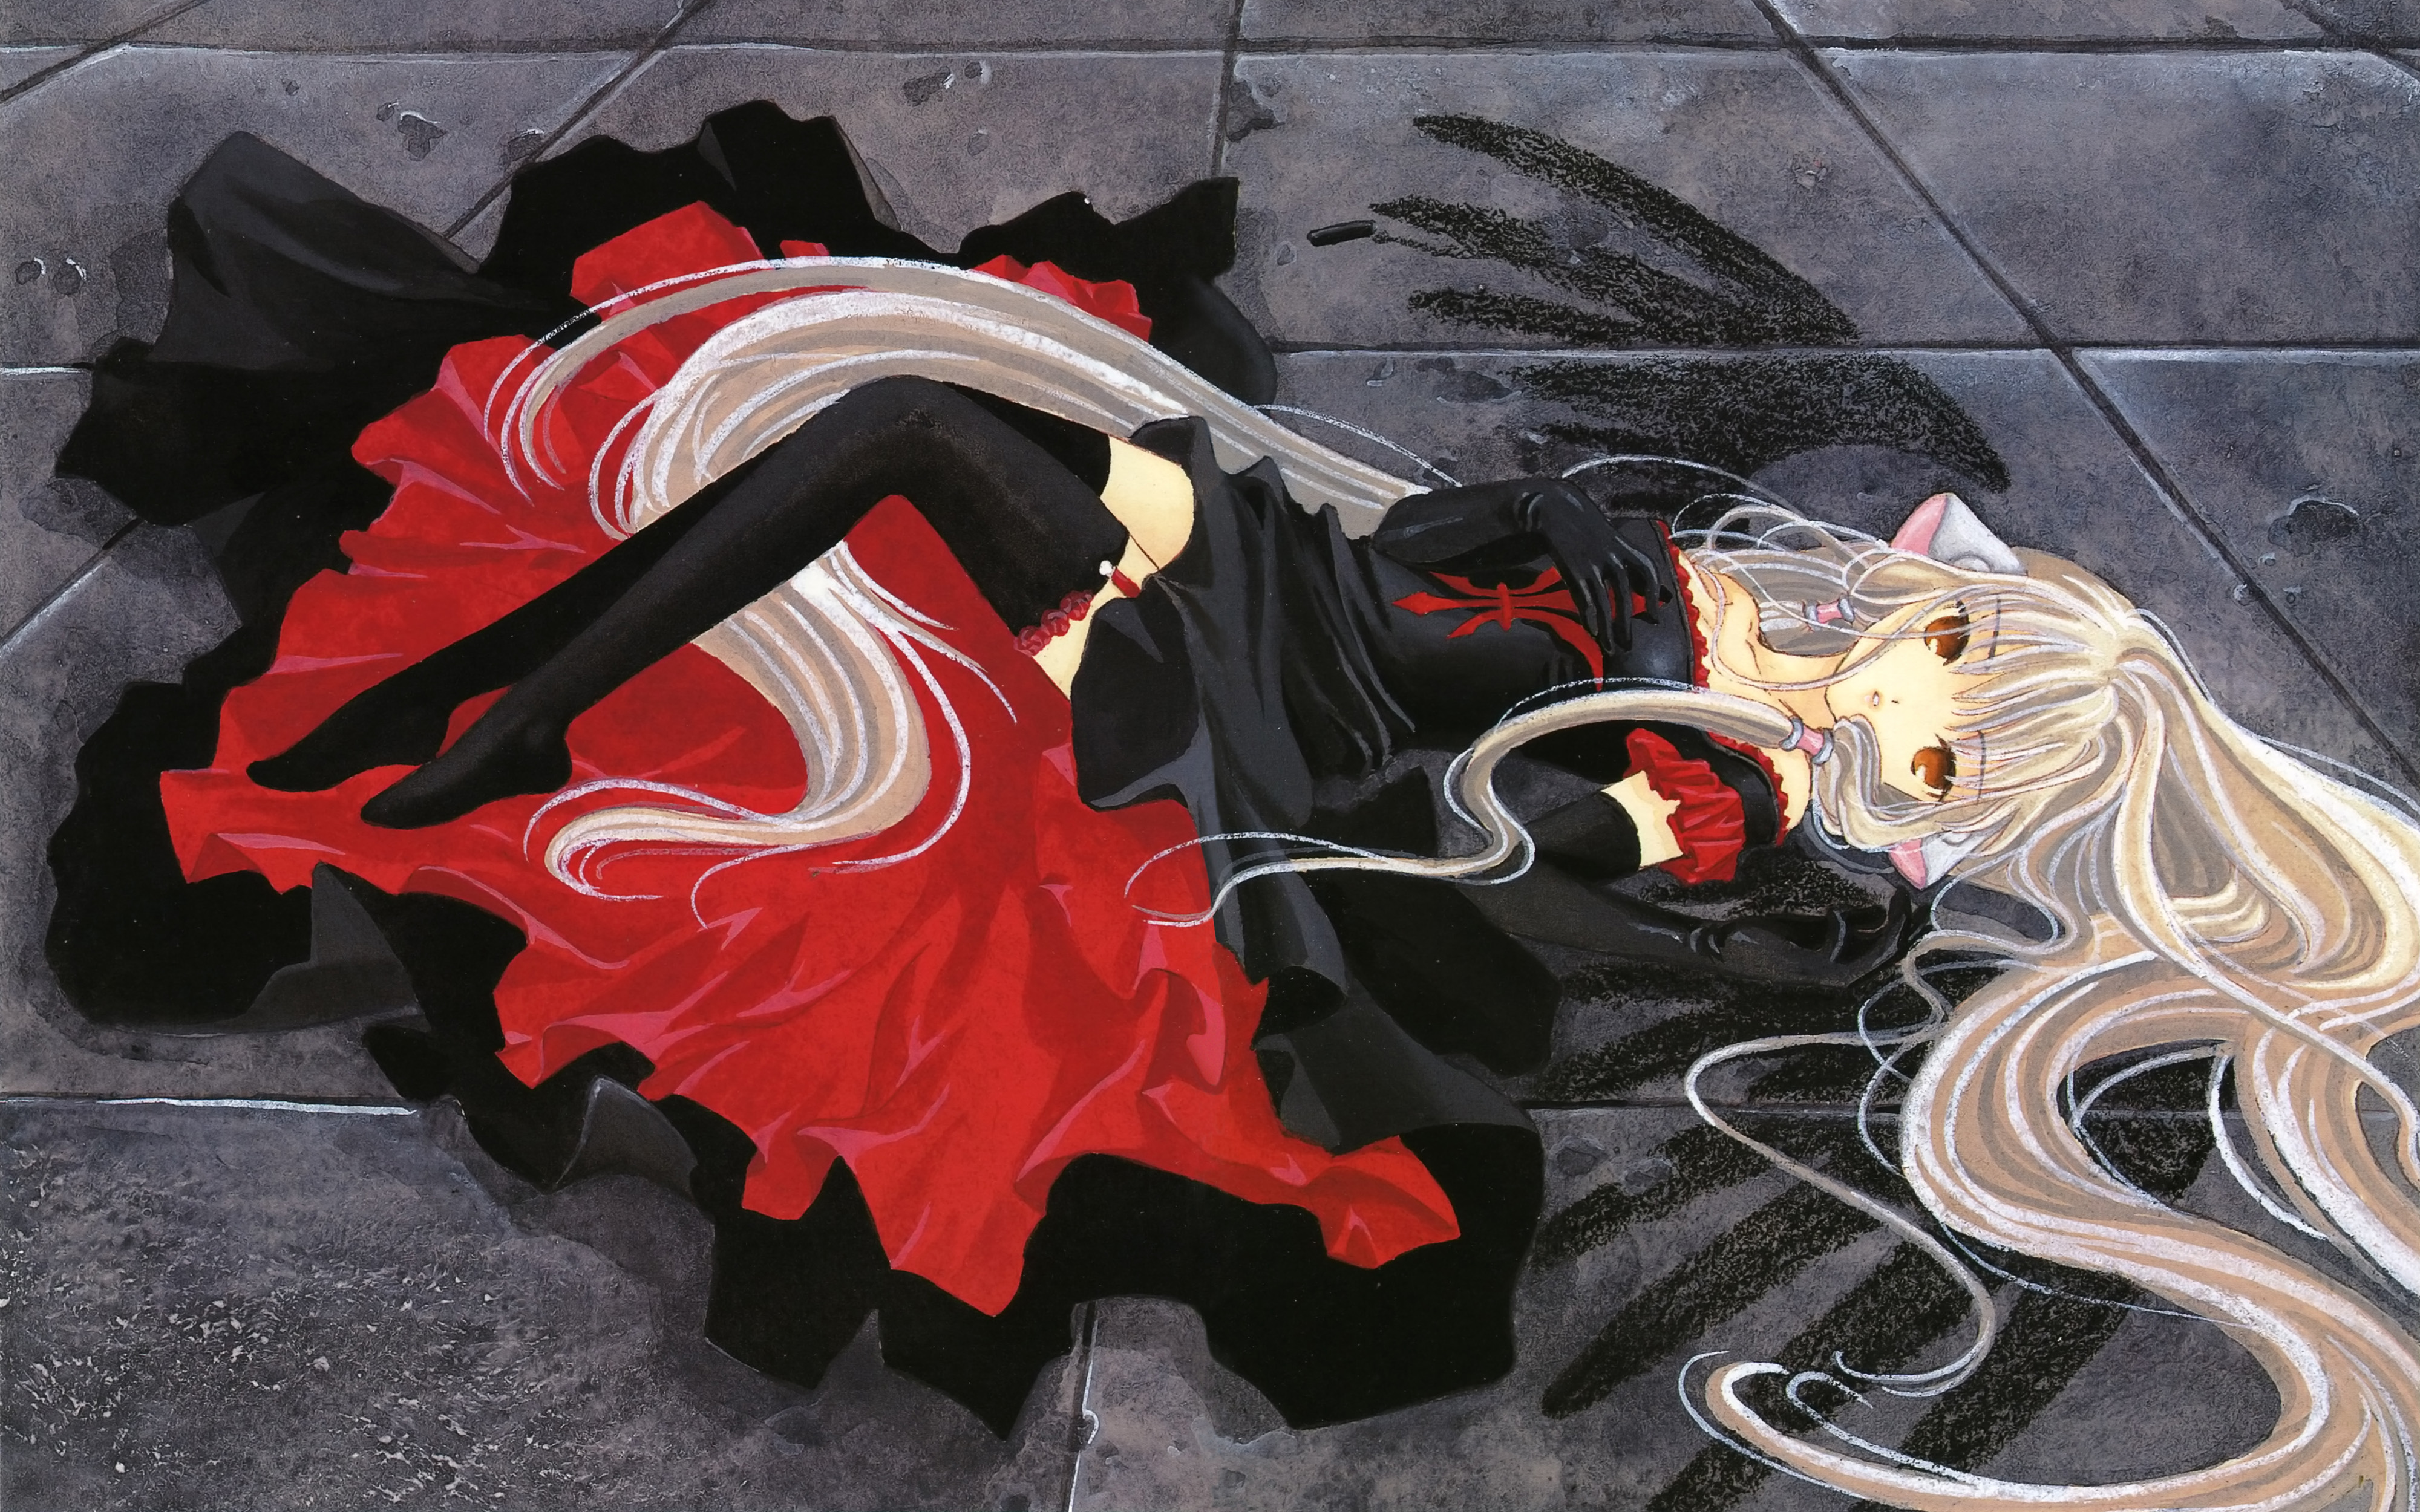 Anime Chobits HD Wallpaper | Background Image